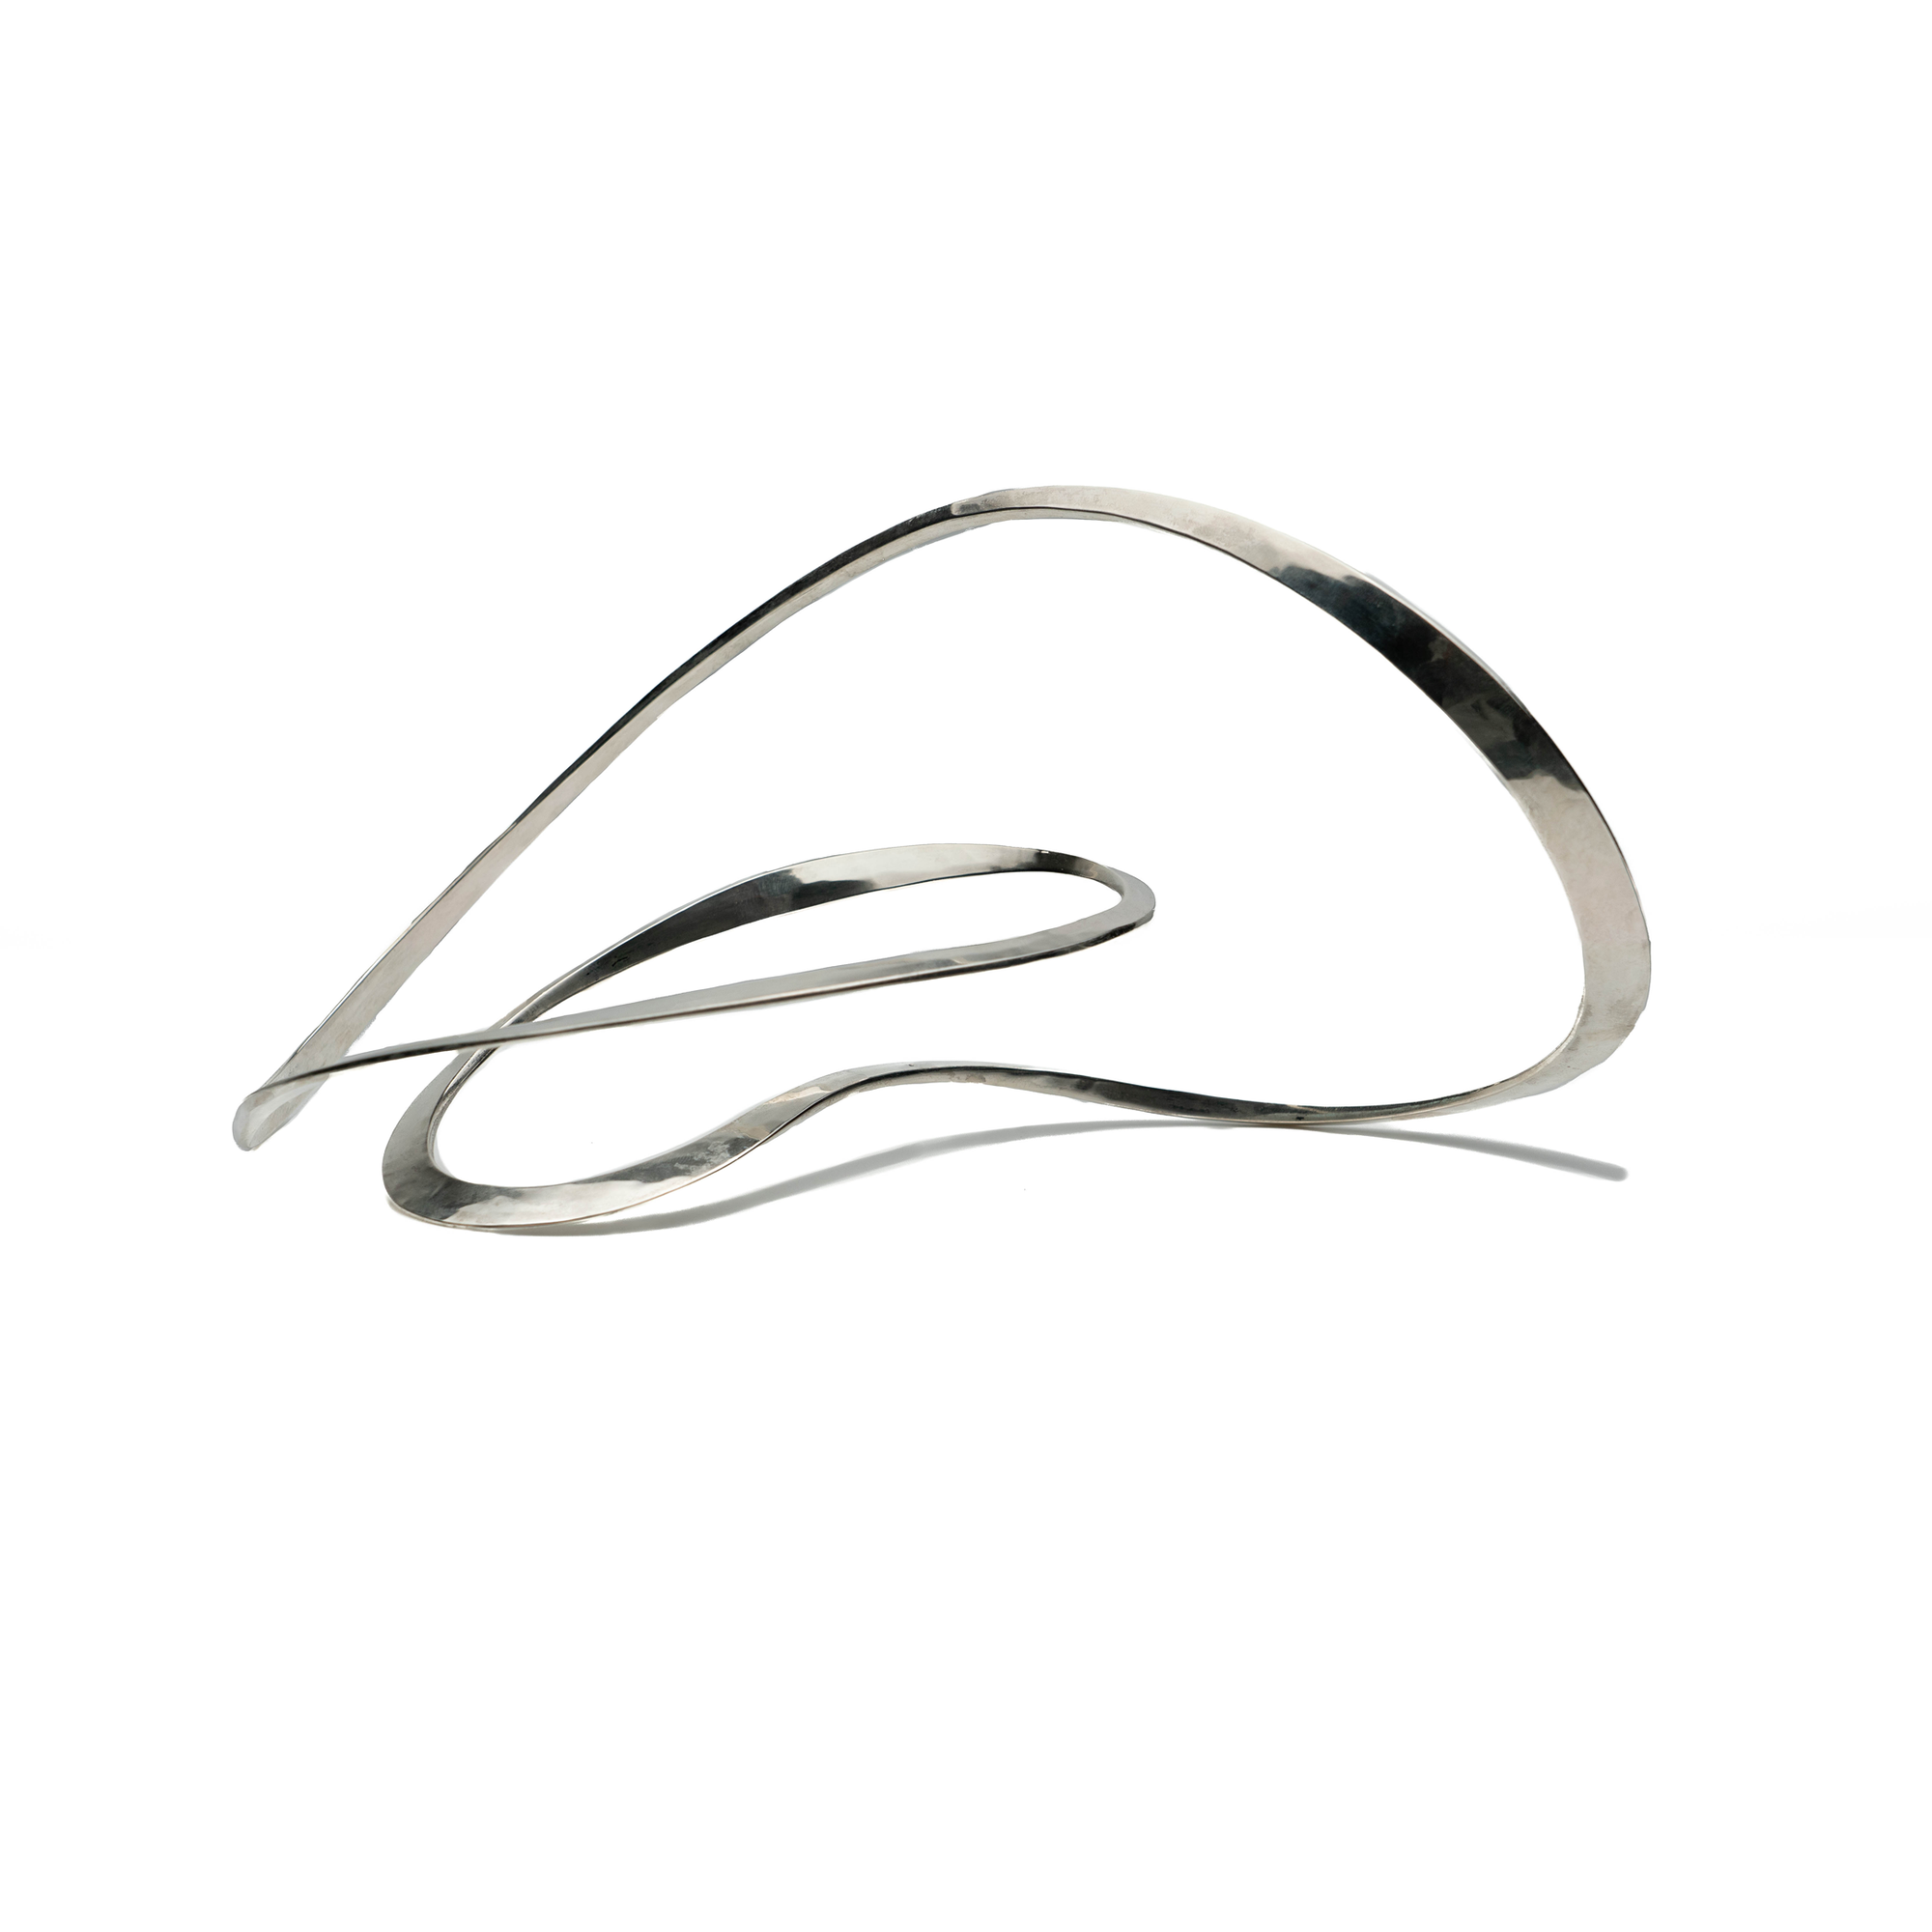 Abstract Silver Infinity Sculpture